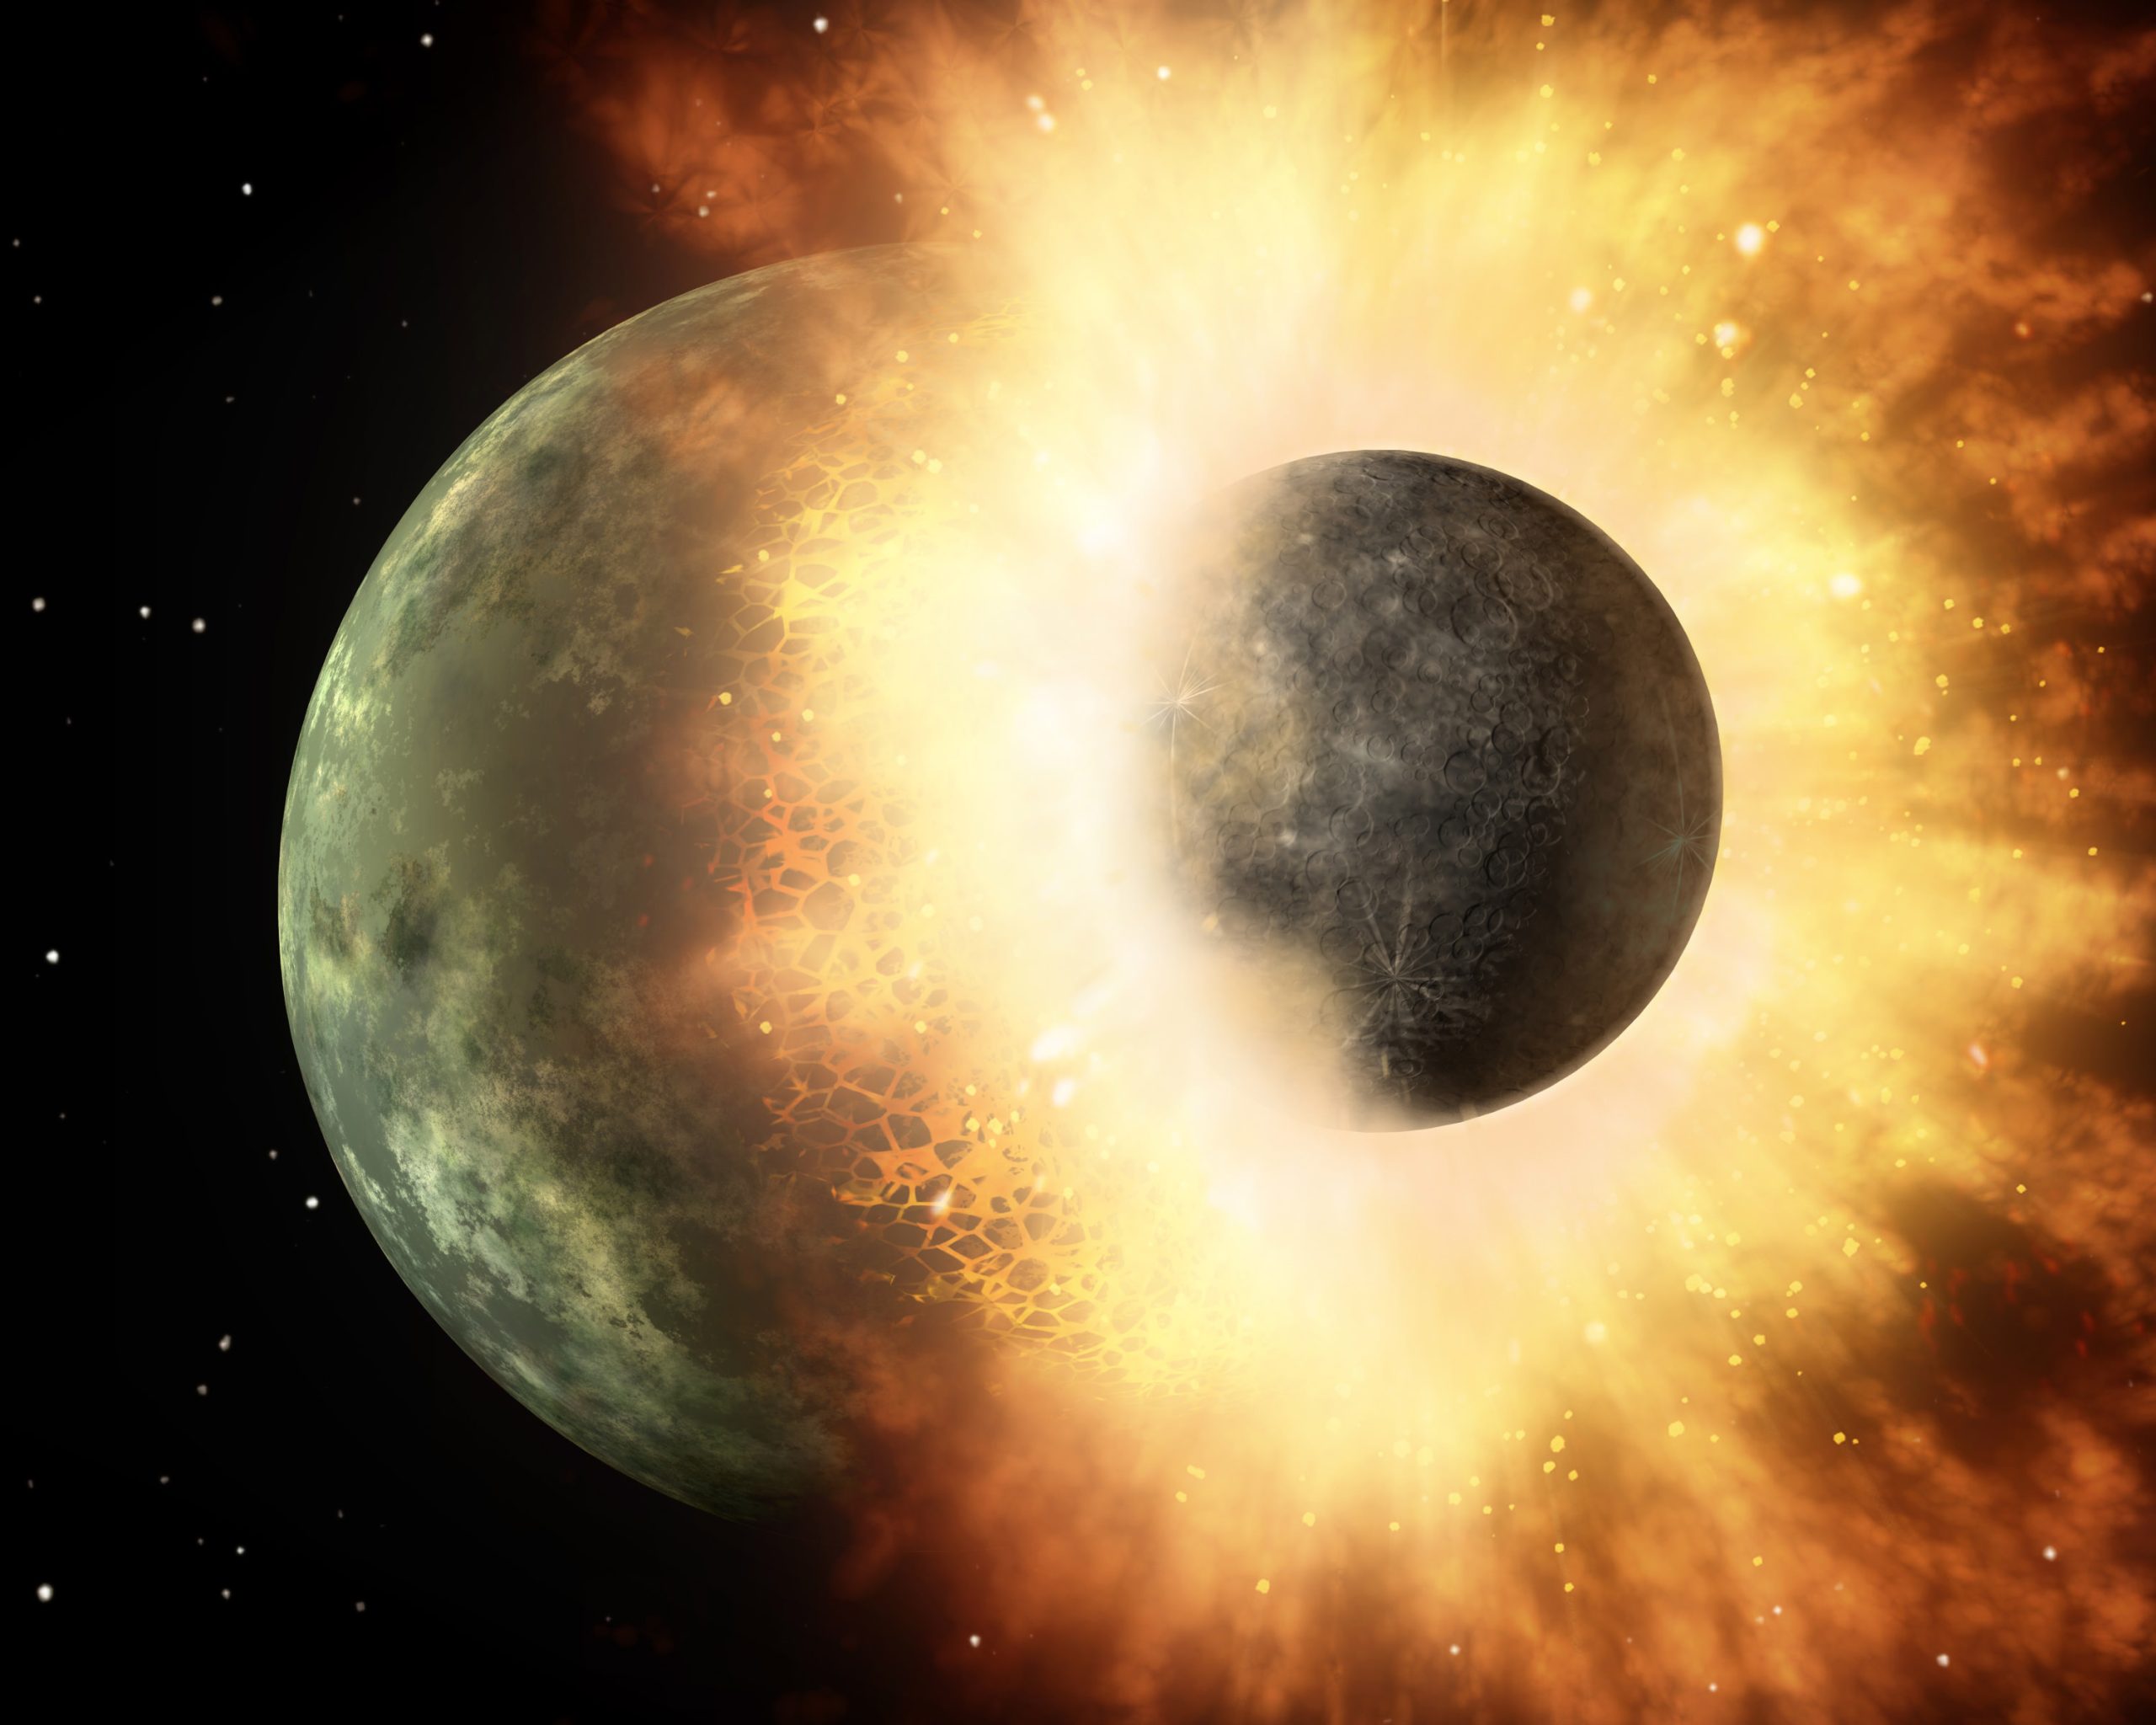 The Age Of The Moon May Be Greater Than We Thought